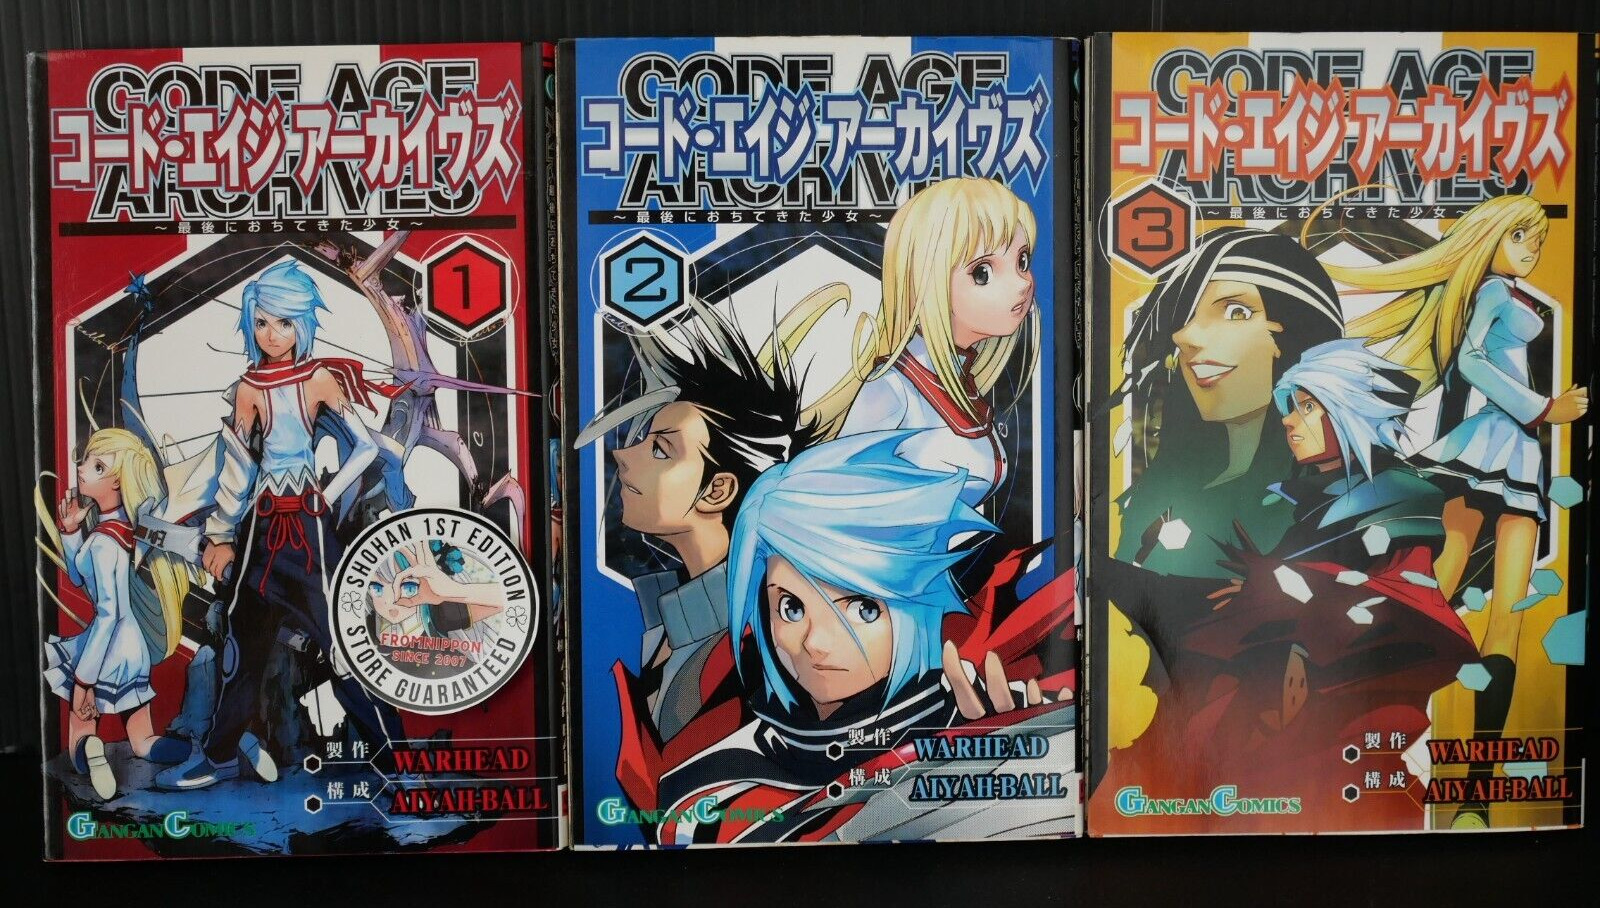 SHOHAN OOP: Code Age Archives Vol.1-3 Manga Complete Set - from JAPAN